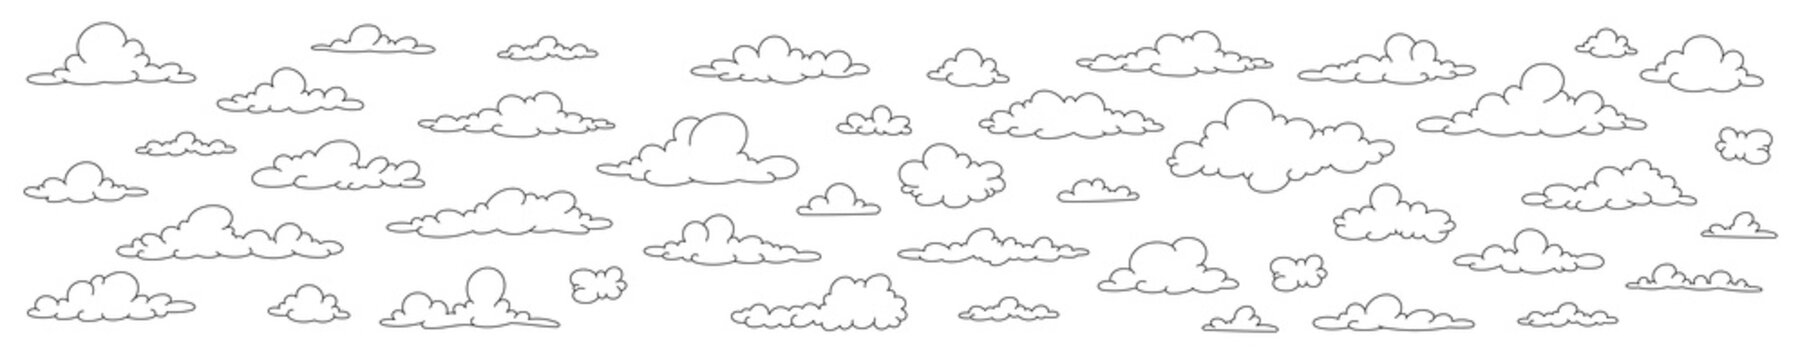 Seth Clouds. Coloring book. Vector line illustration on white background. Doodle